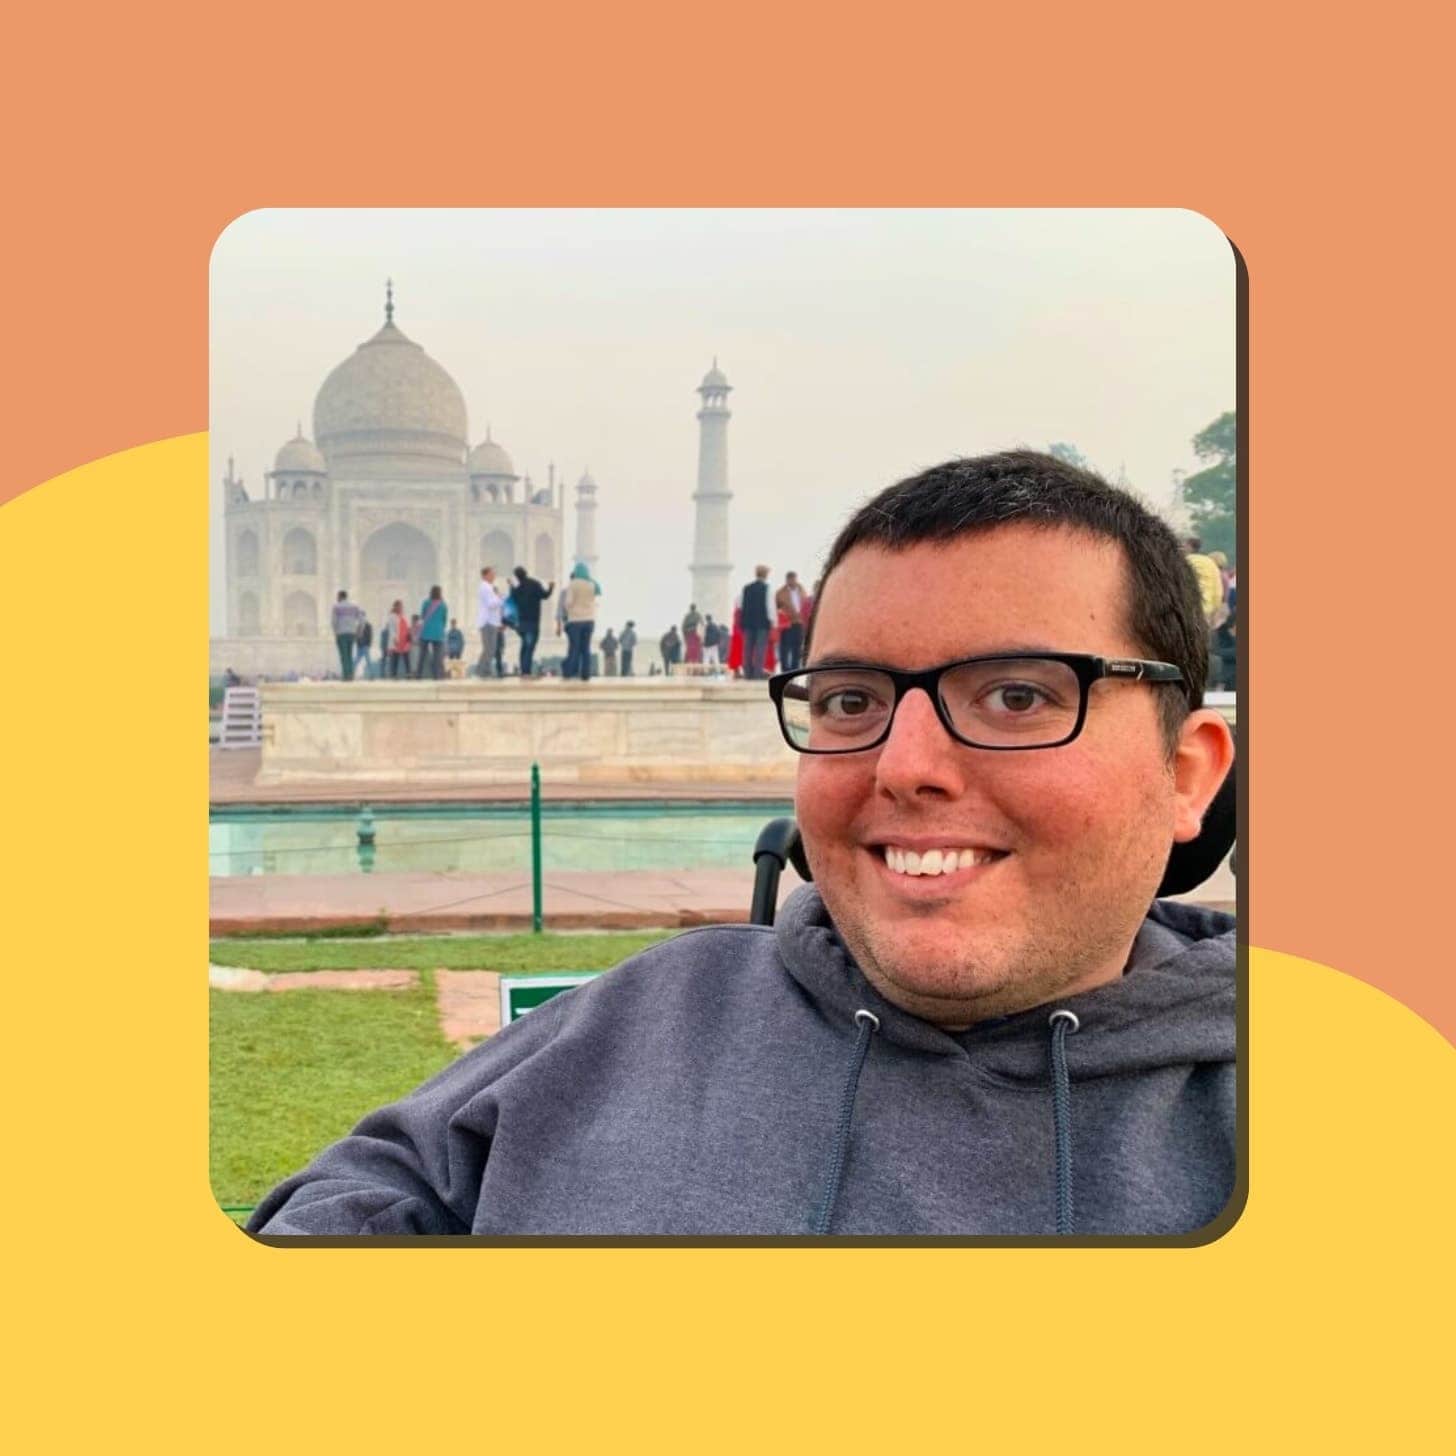 A white man smiling at the Taj Mahal, wearing glasses and sitting in a wheelchair